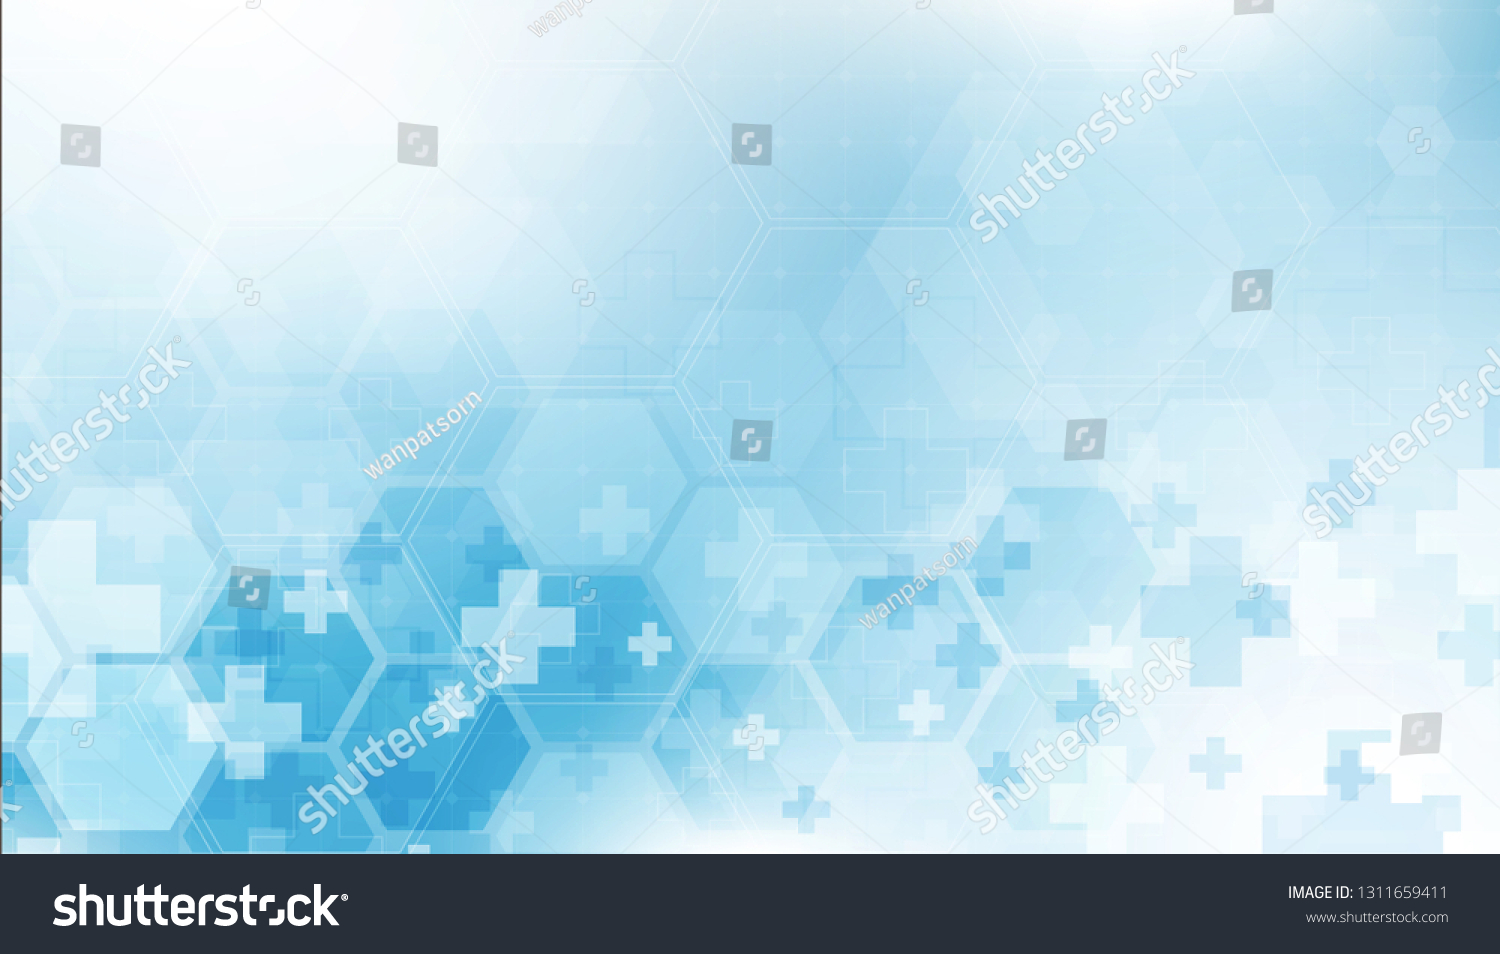 health care and science icon pattern medical innovation concept background vector design. #1311659411